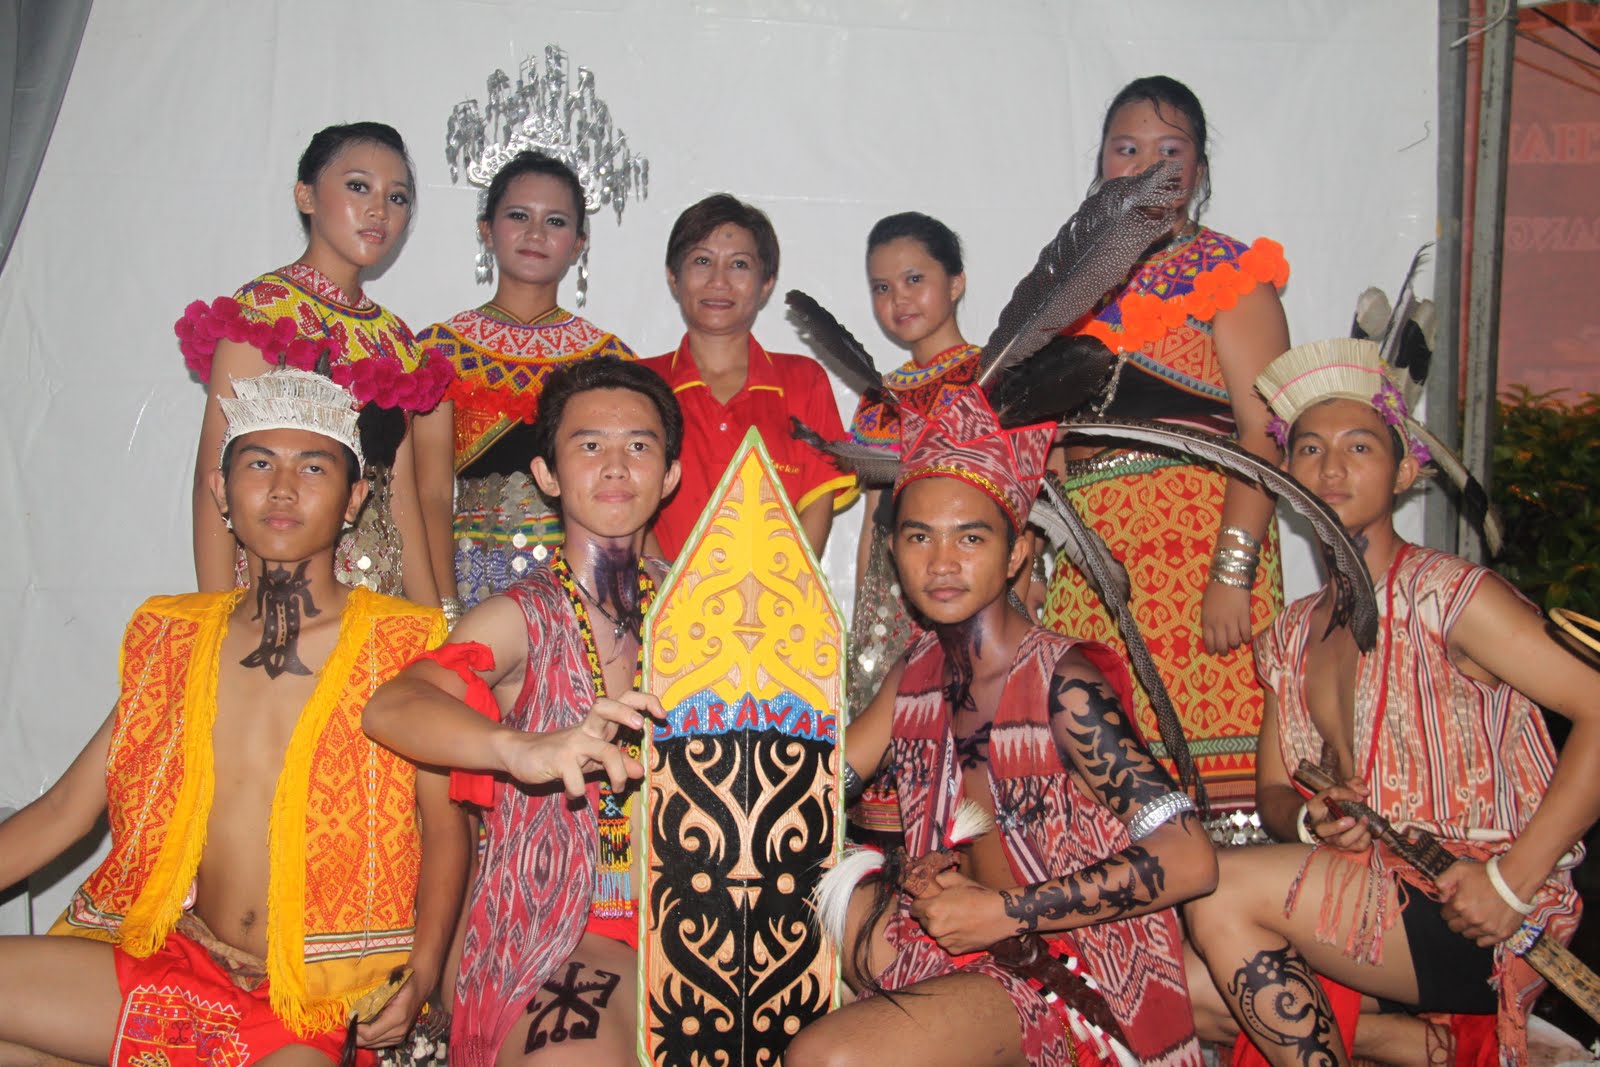 My Life, My Journey: MIRI STREET PARADE - DAM'S CULTURAL TROUPE